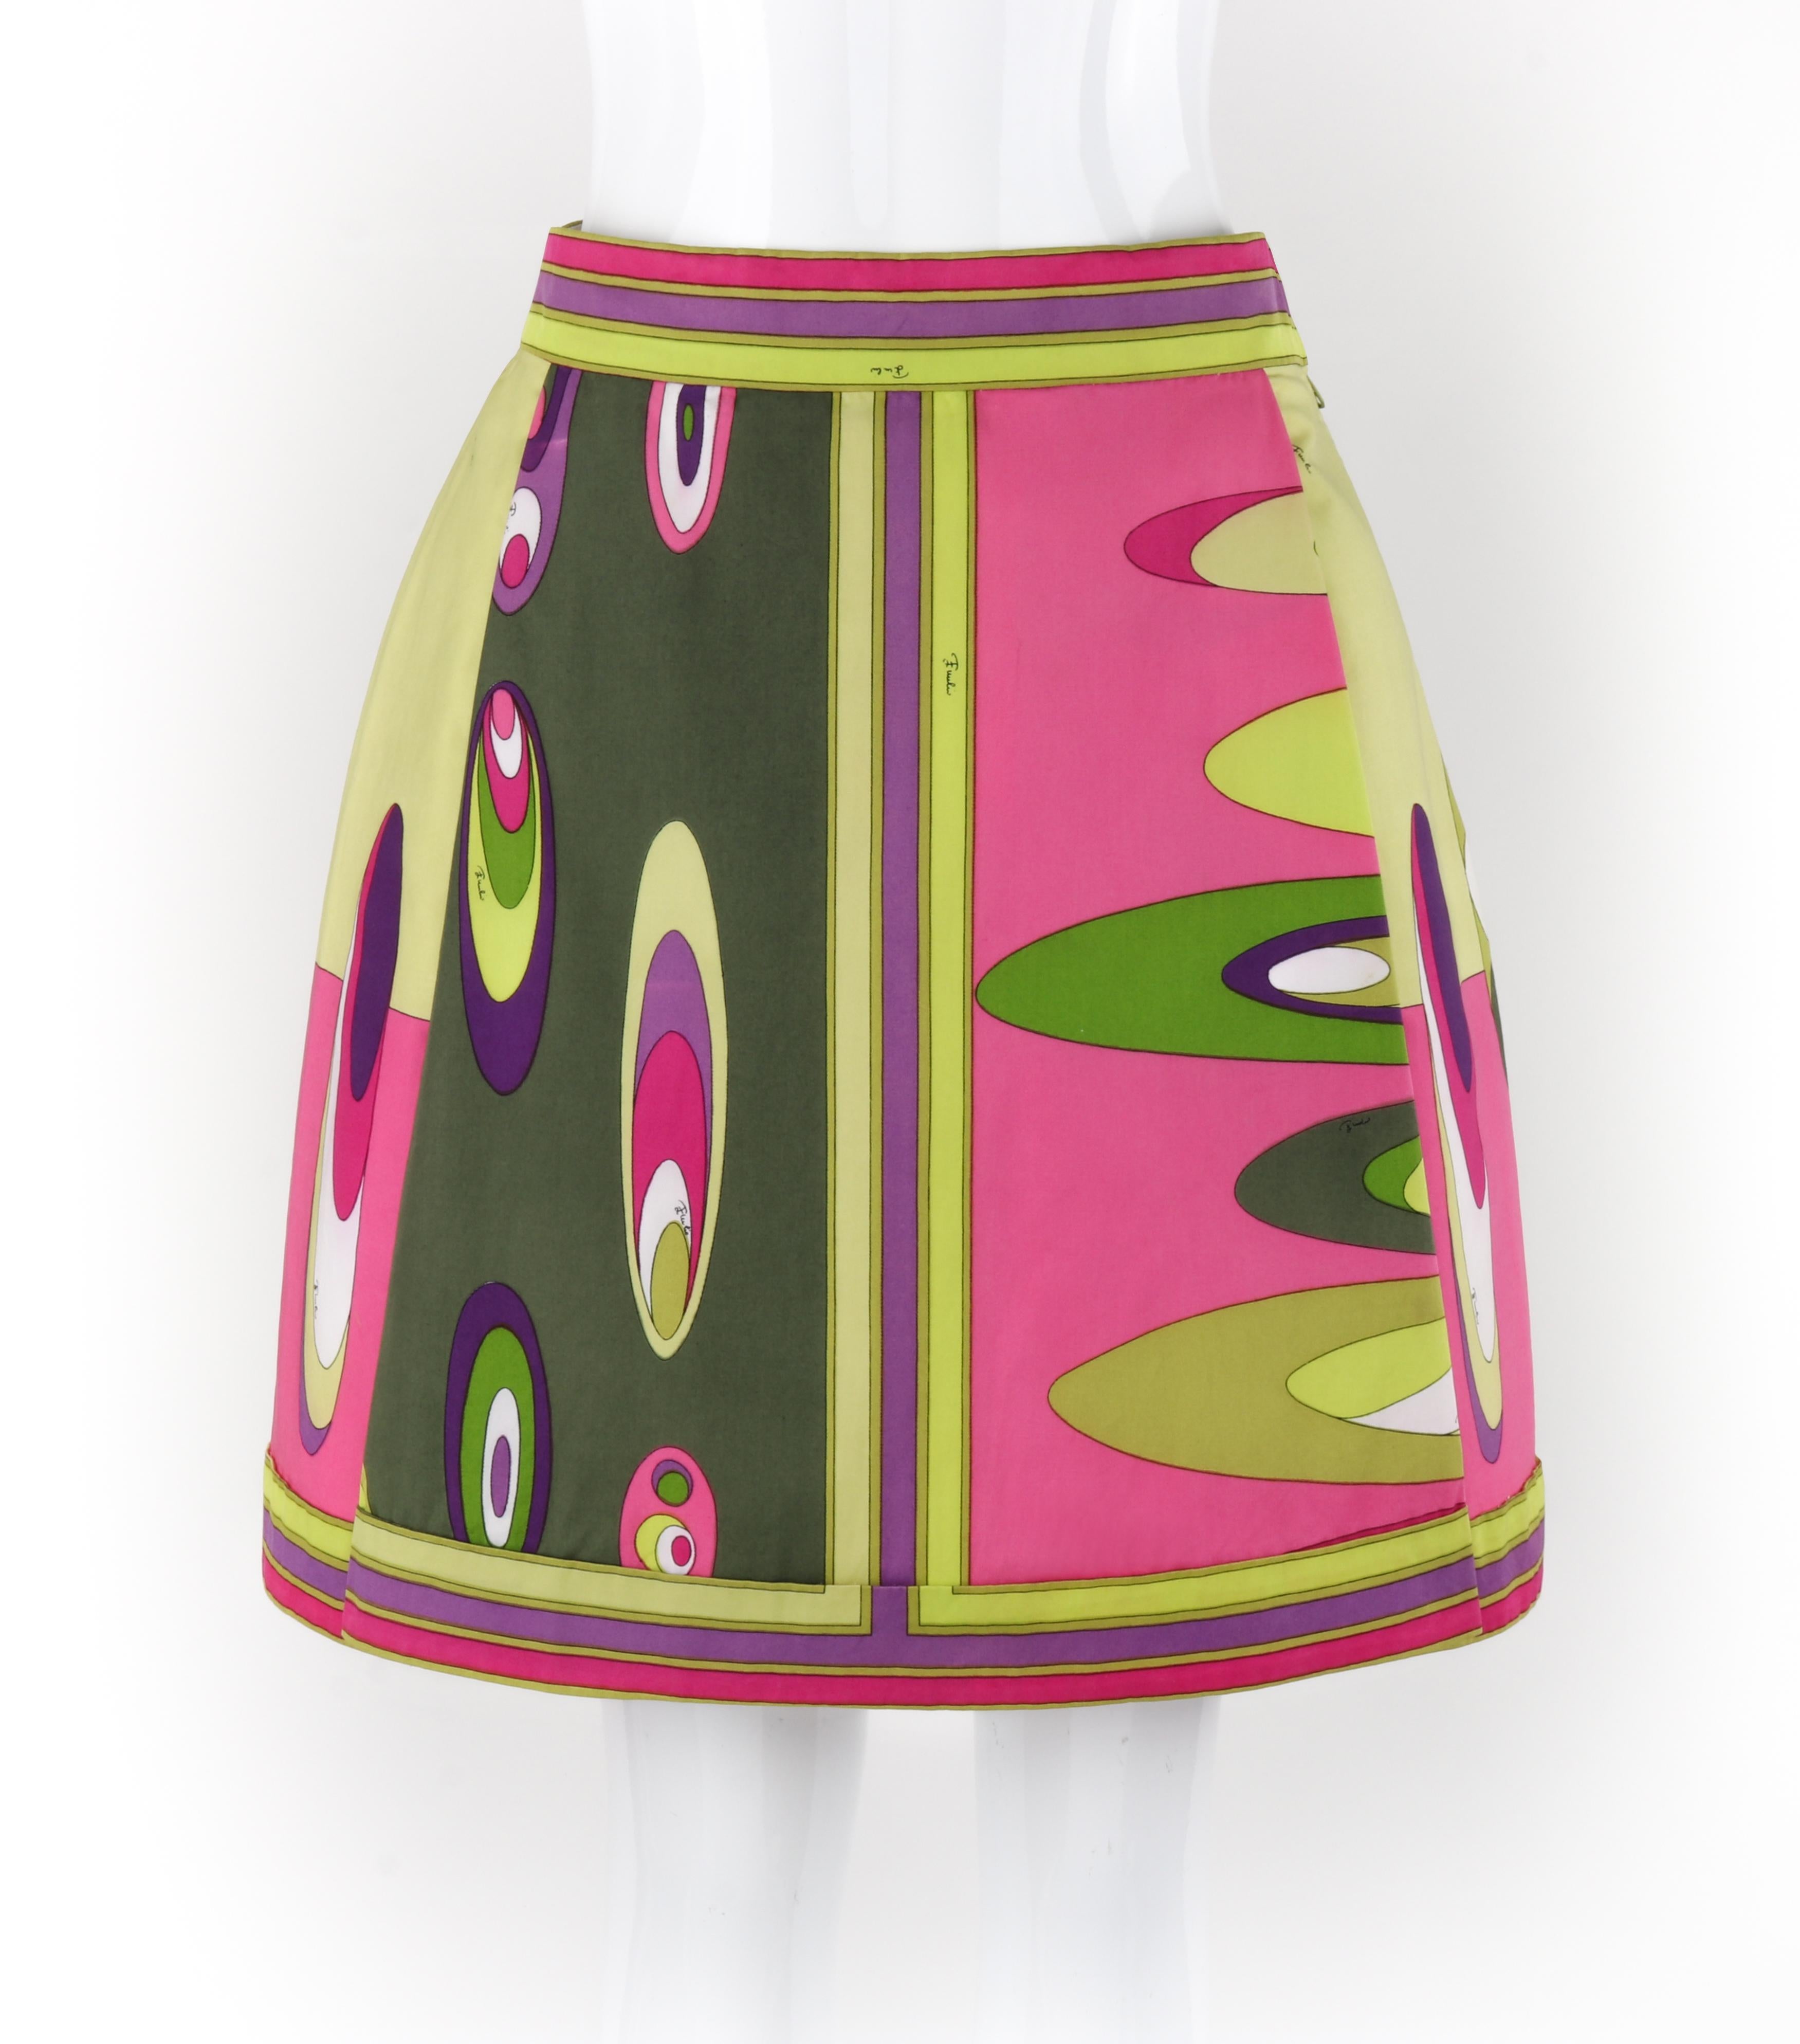 Brand / Manufacturer: Emilio Pucci
Circa: 1969
Designer: Emilio Pucci 
Style: Mini Skirt
Color(s): Shades of green, pink, purple, white, black
Lined: No
Marked Fabric Content: 